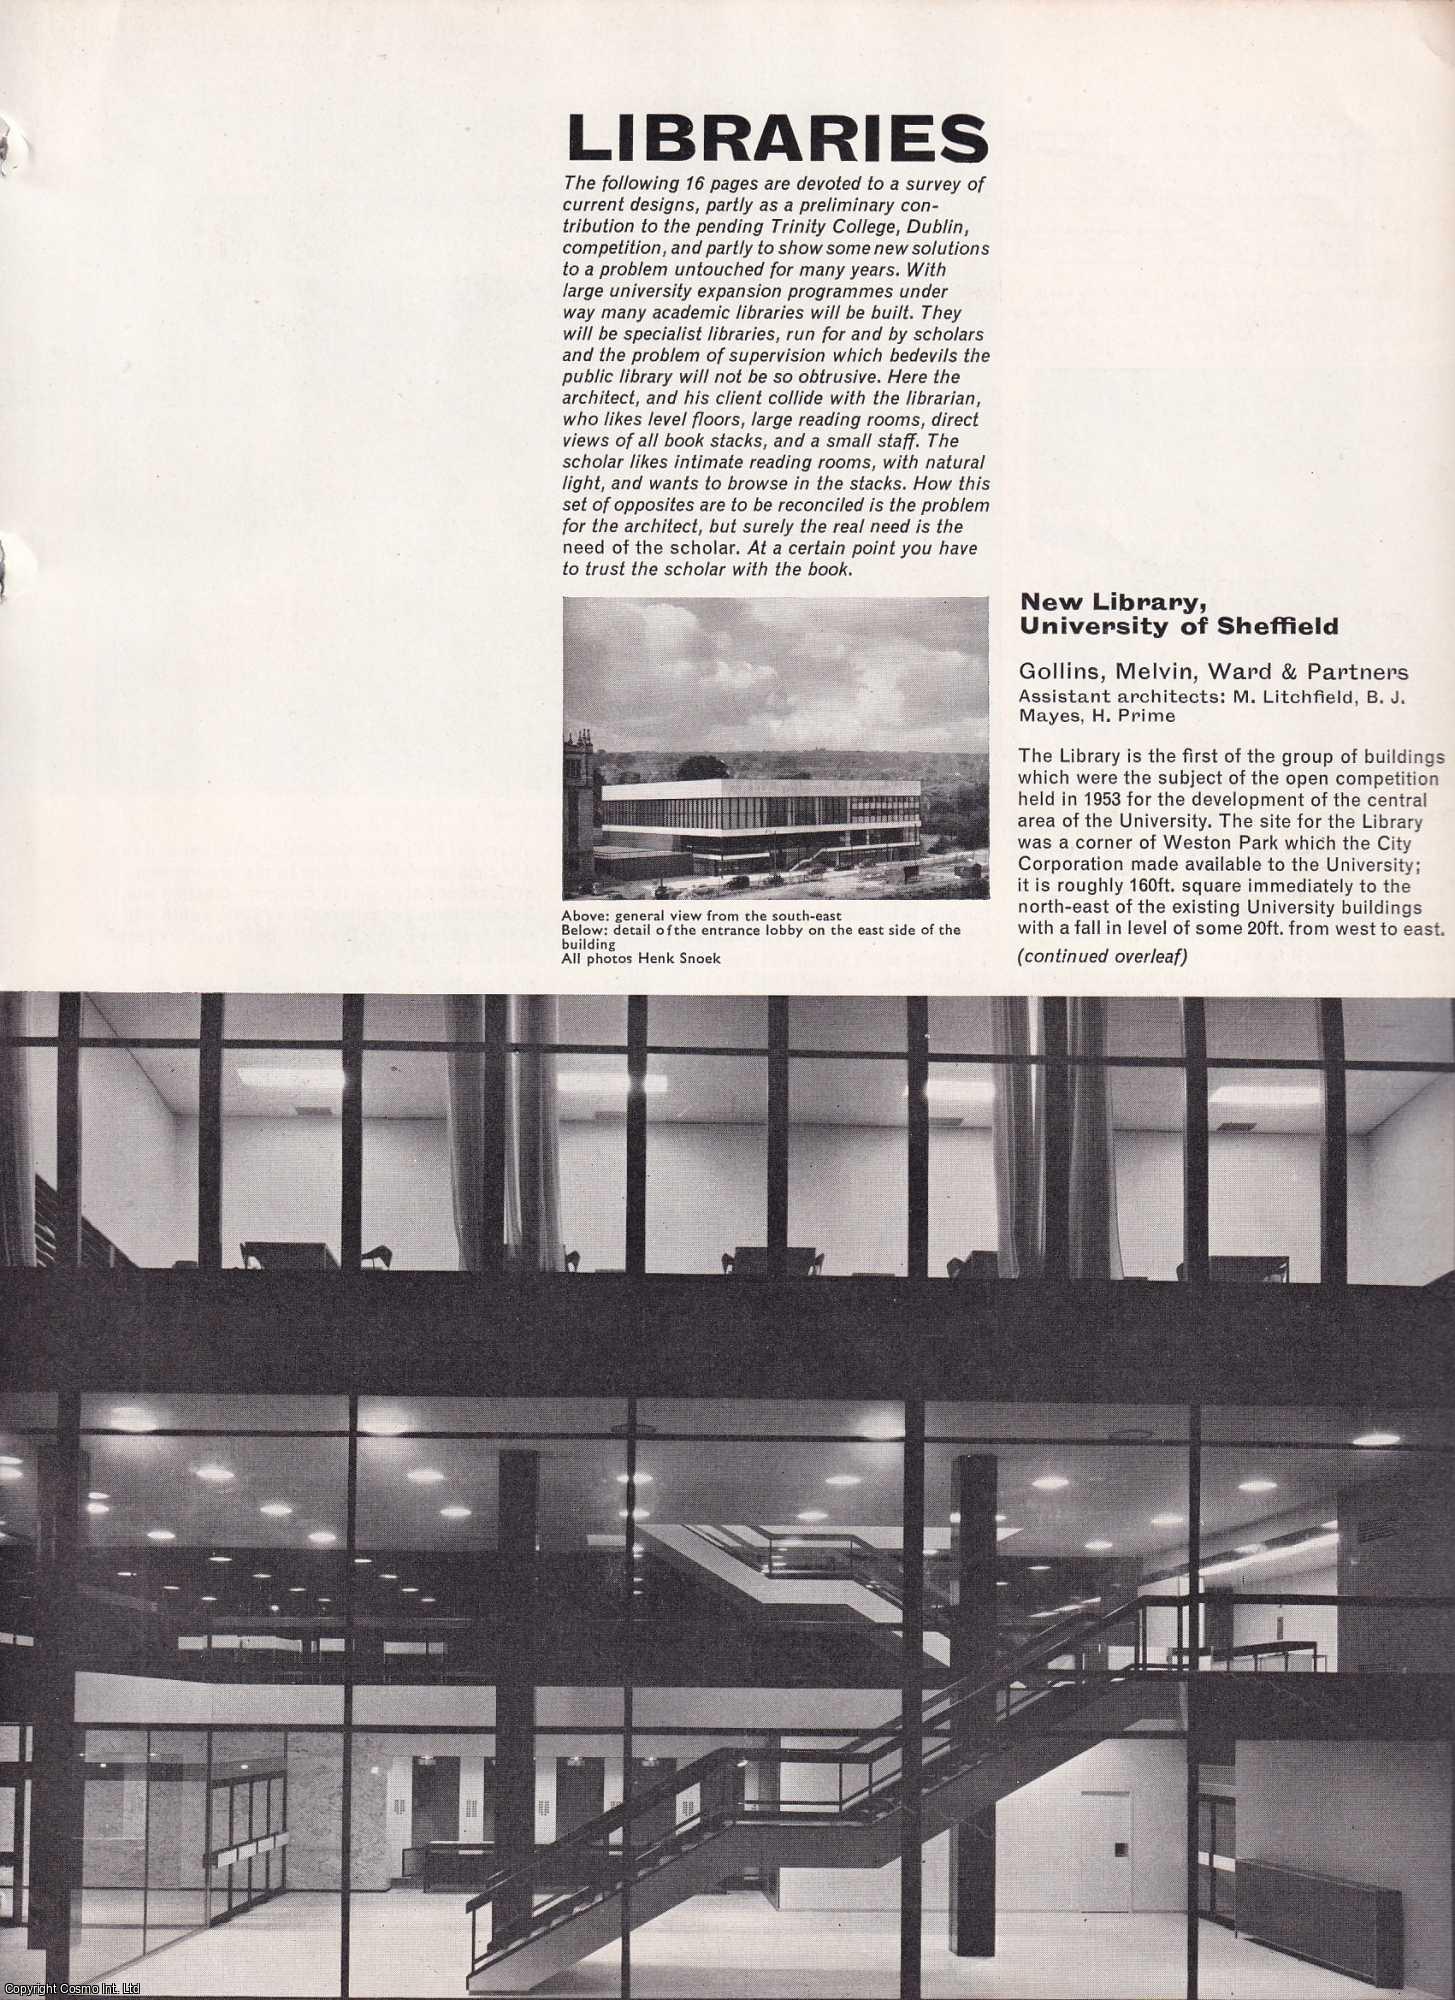 LIBRARIES - Libraries. Designs to illustrate the challenges in designing new university libraries to accompany the expansion of higher eductation in the 1950s. This is an original article from The Architectural Review, 1955.